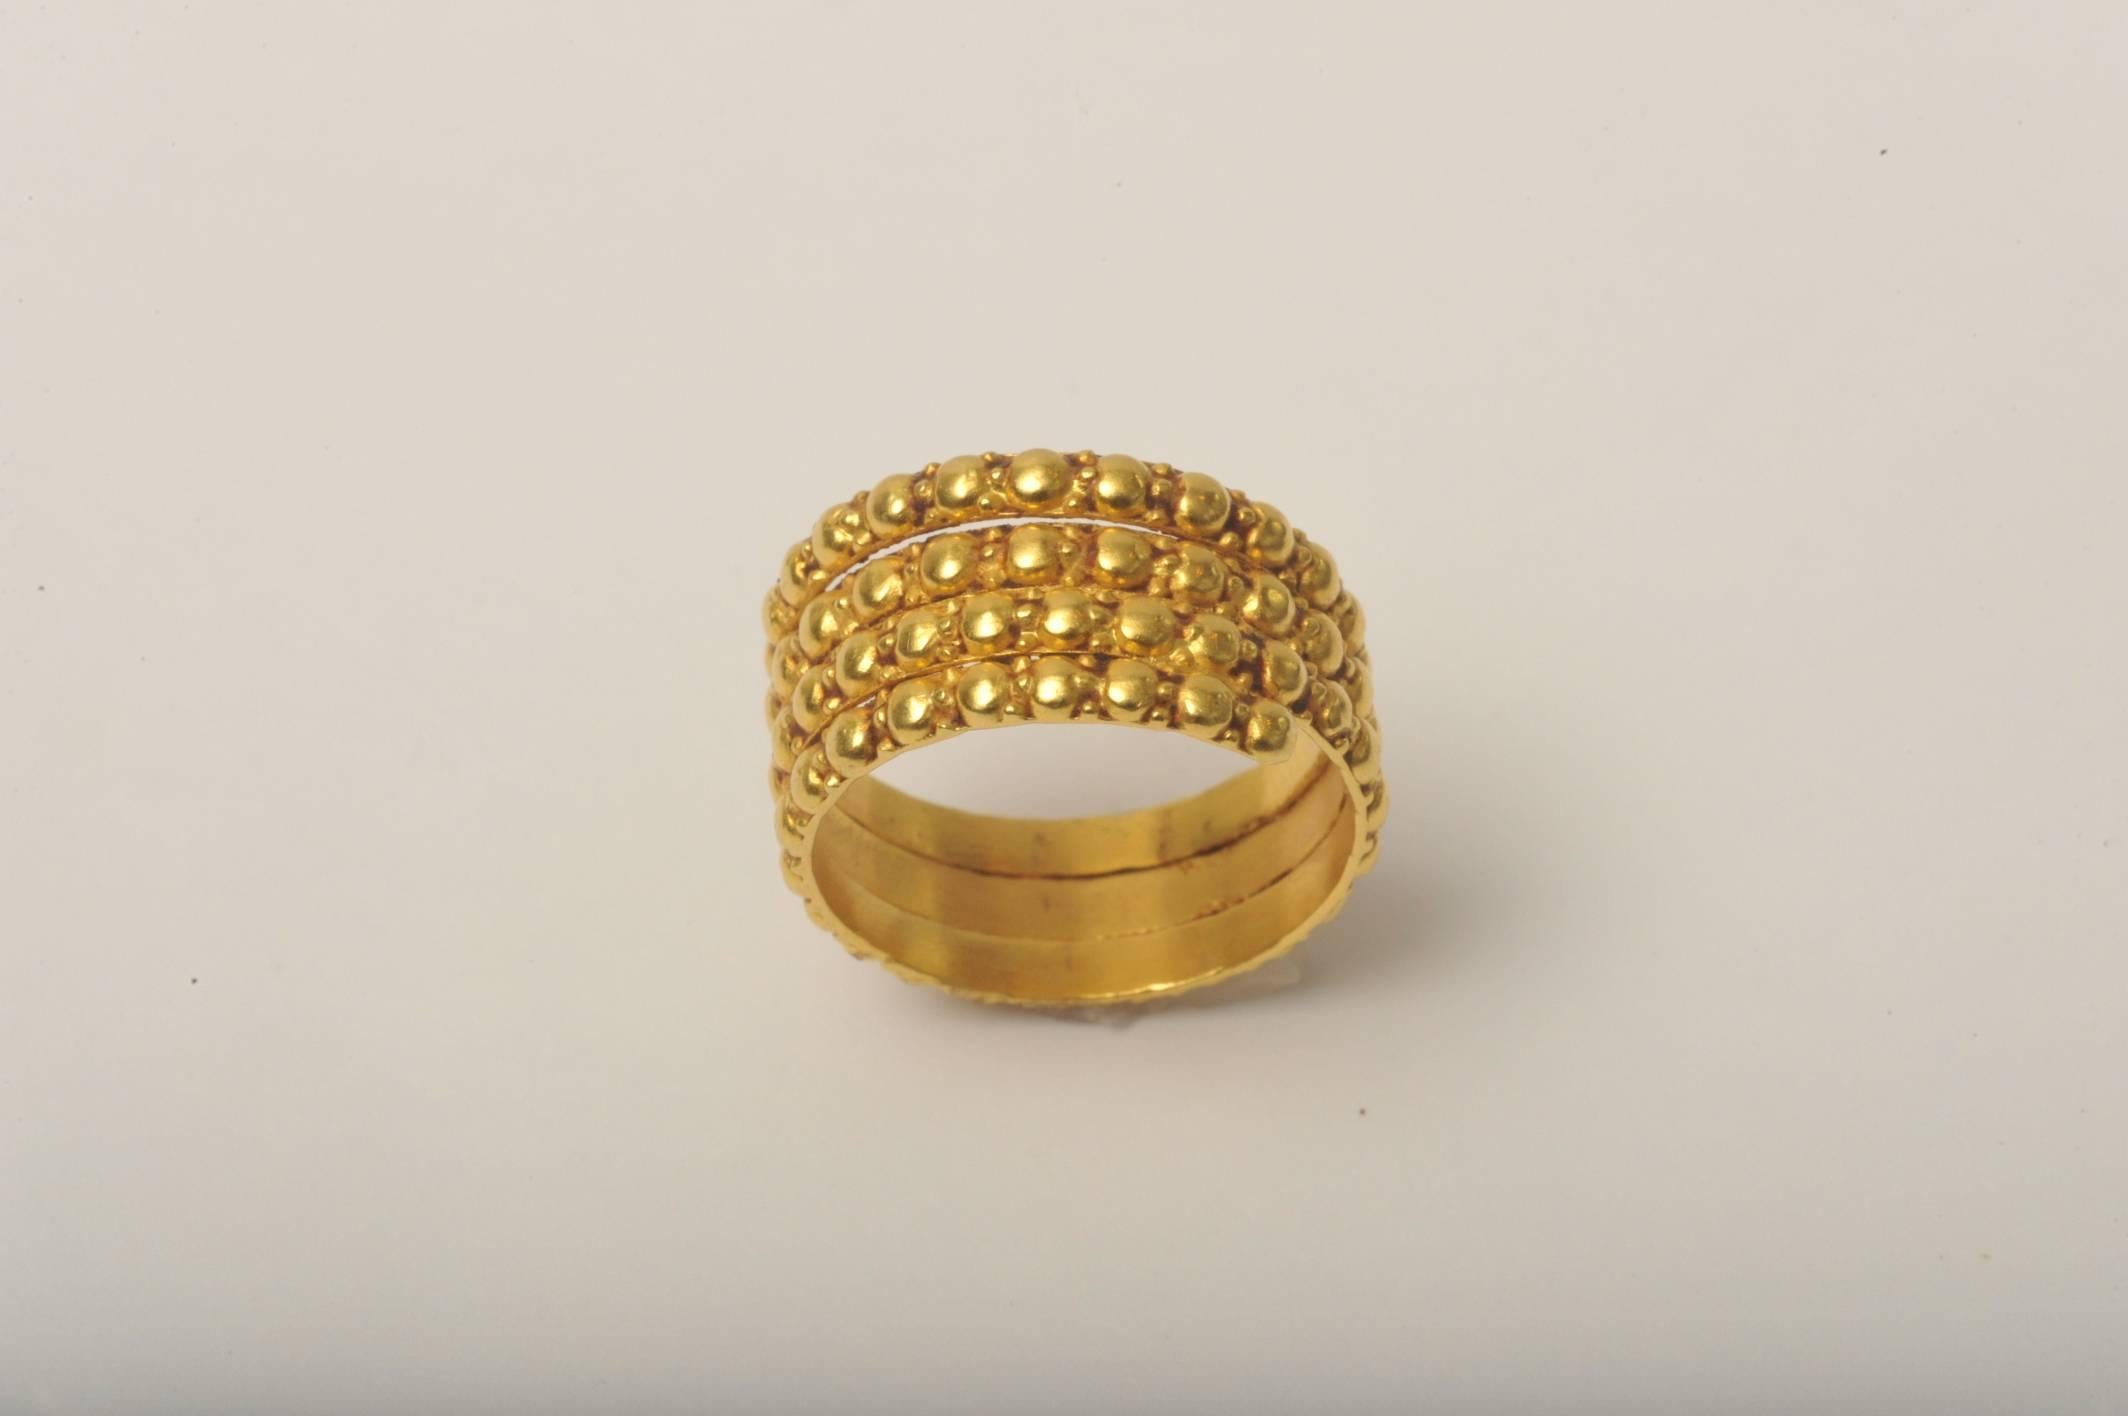 Exquisitely hand crafted 22K gold coil ring with fine granulation work which offers a textured look.  Size is 7.5 with flexibility.